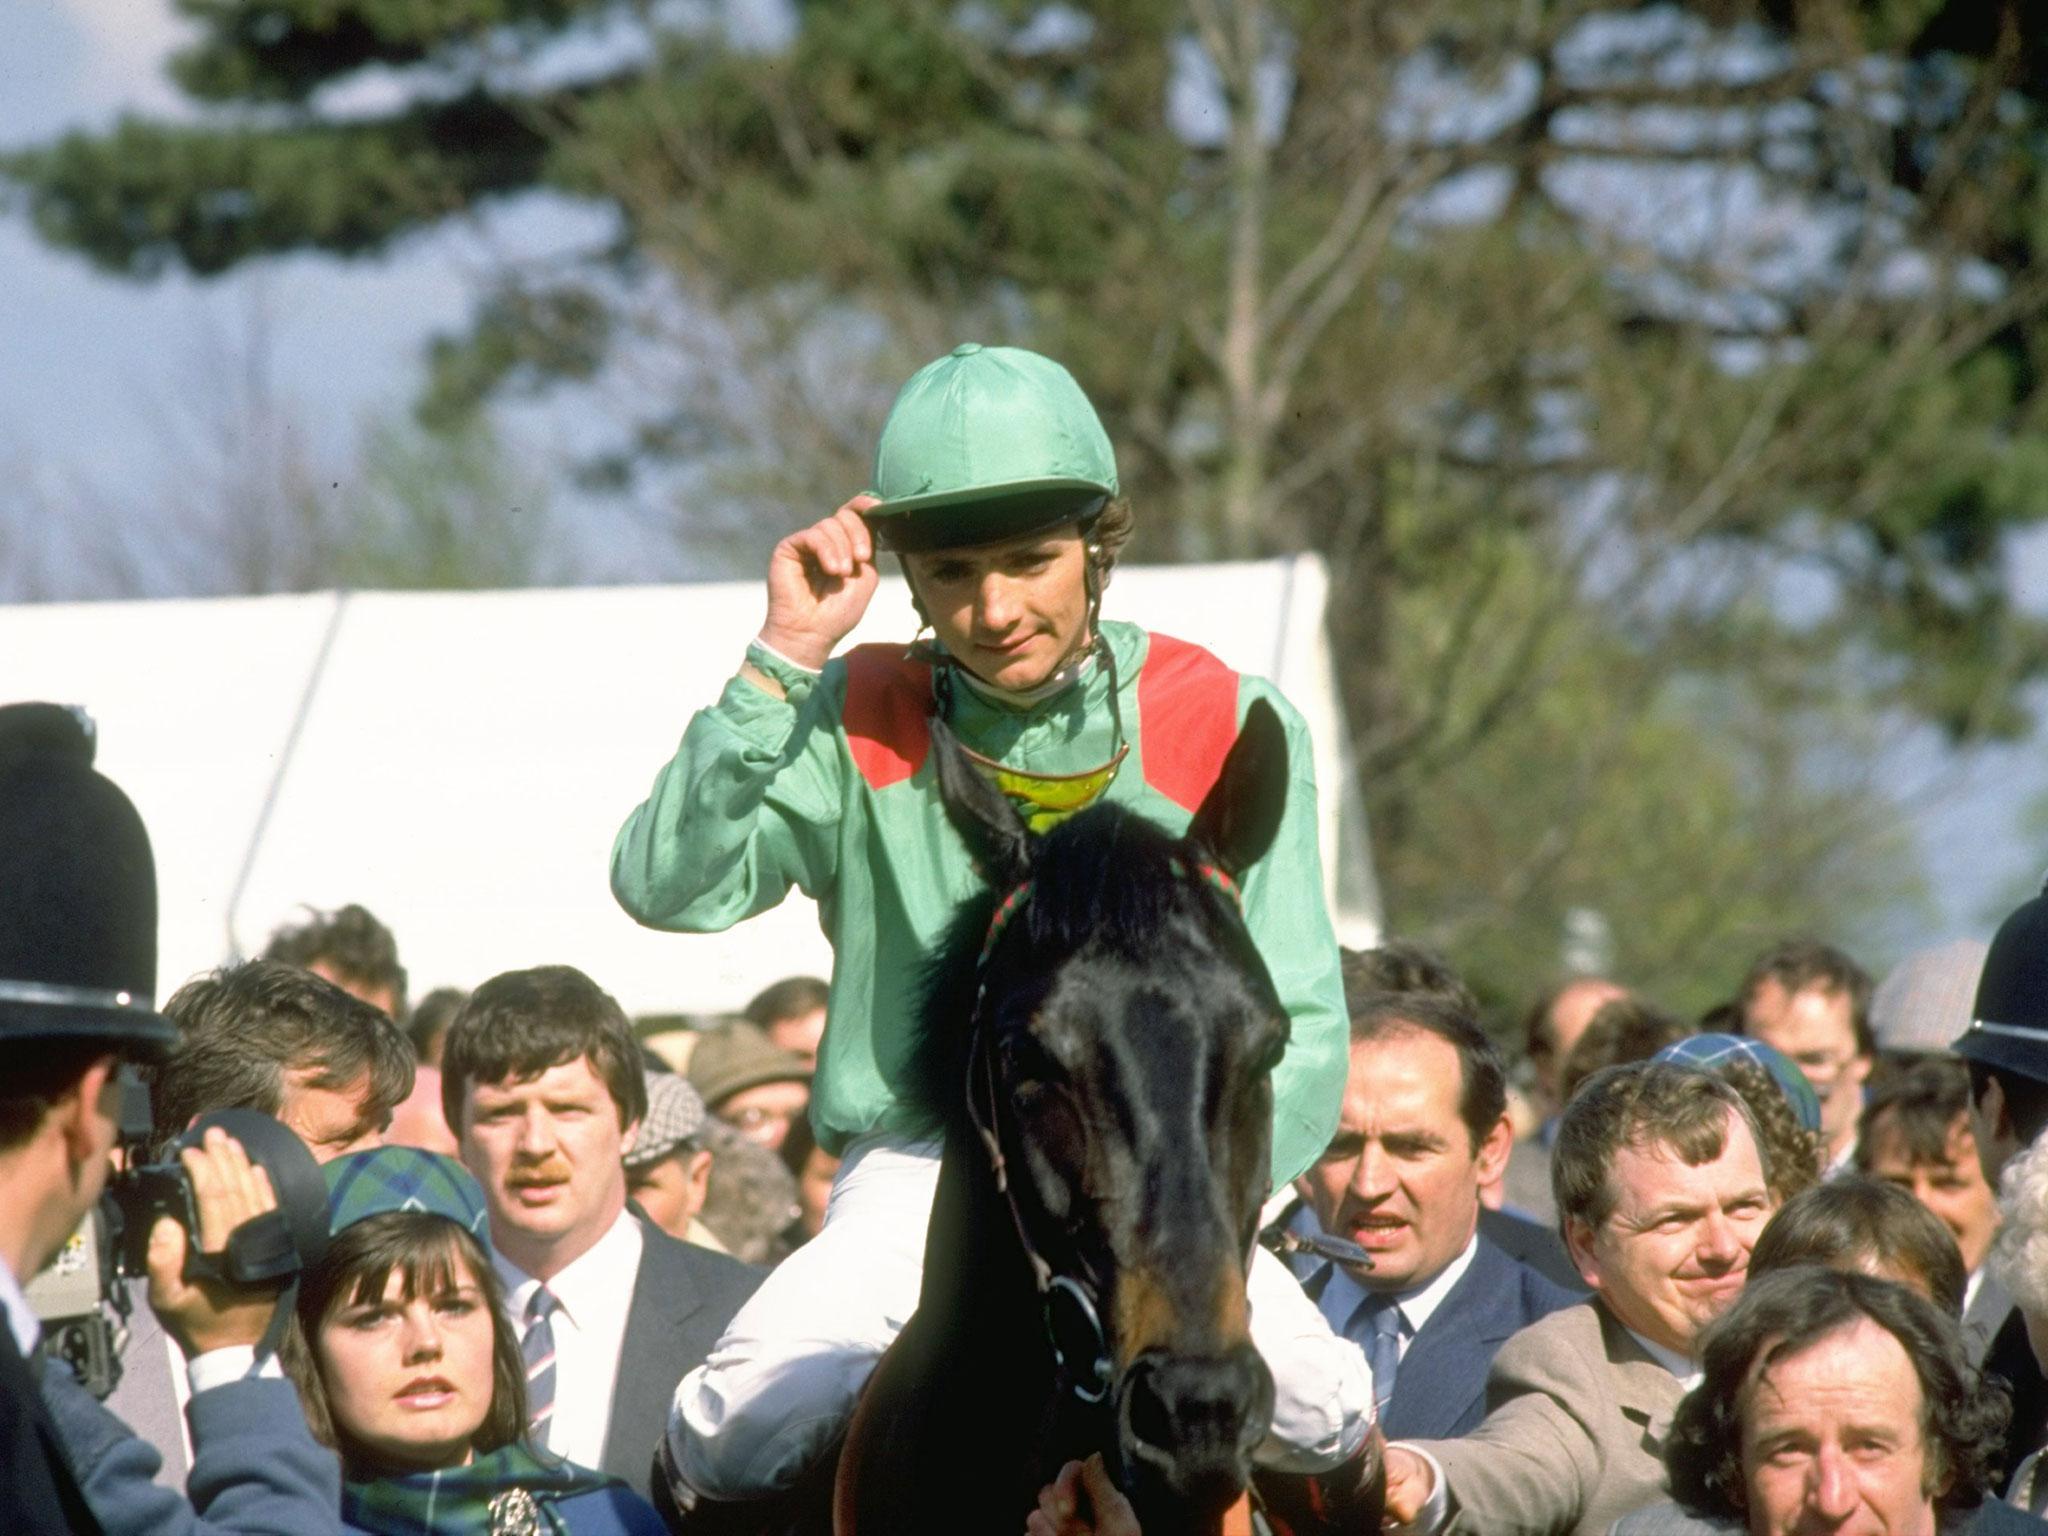 Walter Swinburn on Doyoun after winning the 2,000 Guineas Stakes at the Newmarket meeting, England, 1988